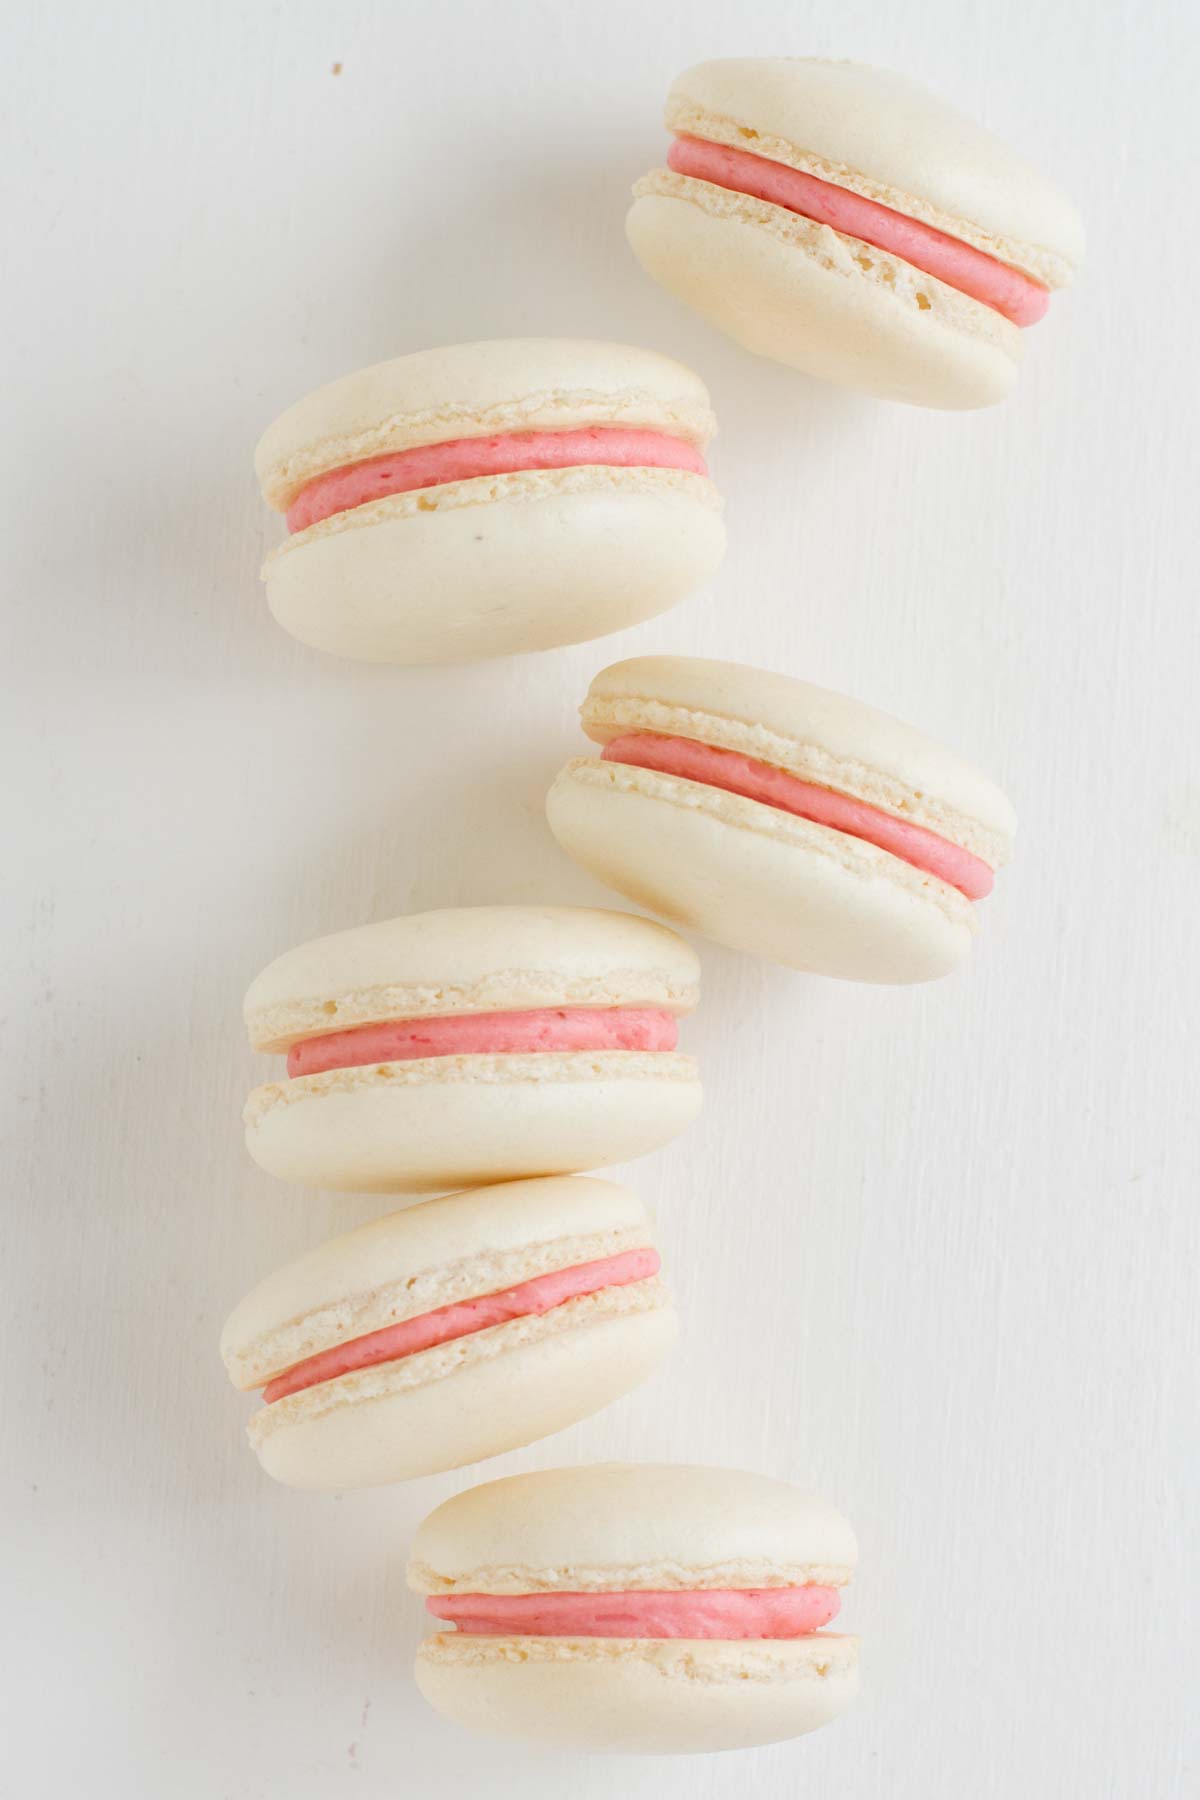 Strawberry Colada Macarons on their sides showing the filling.